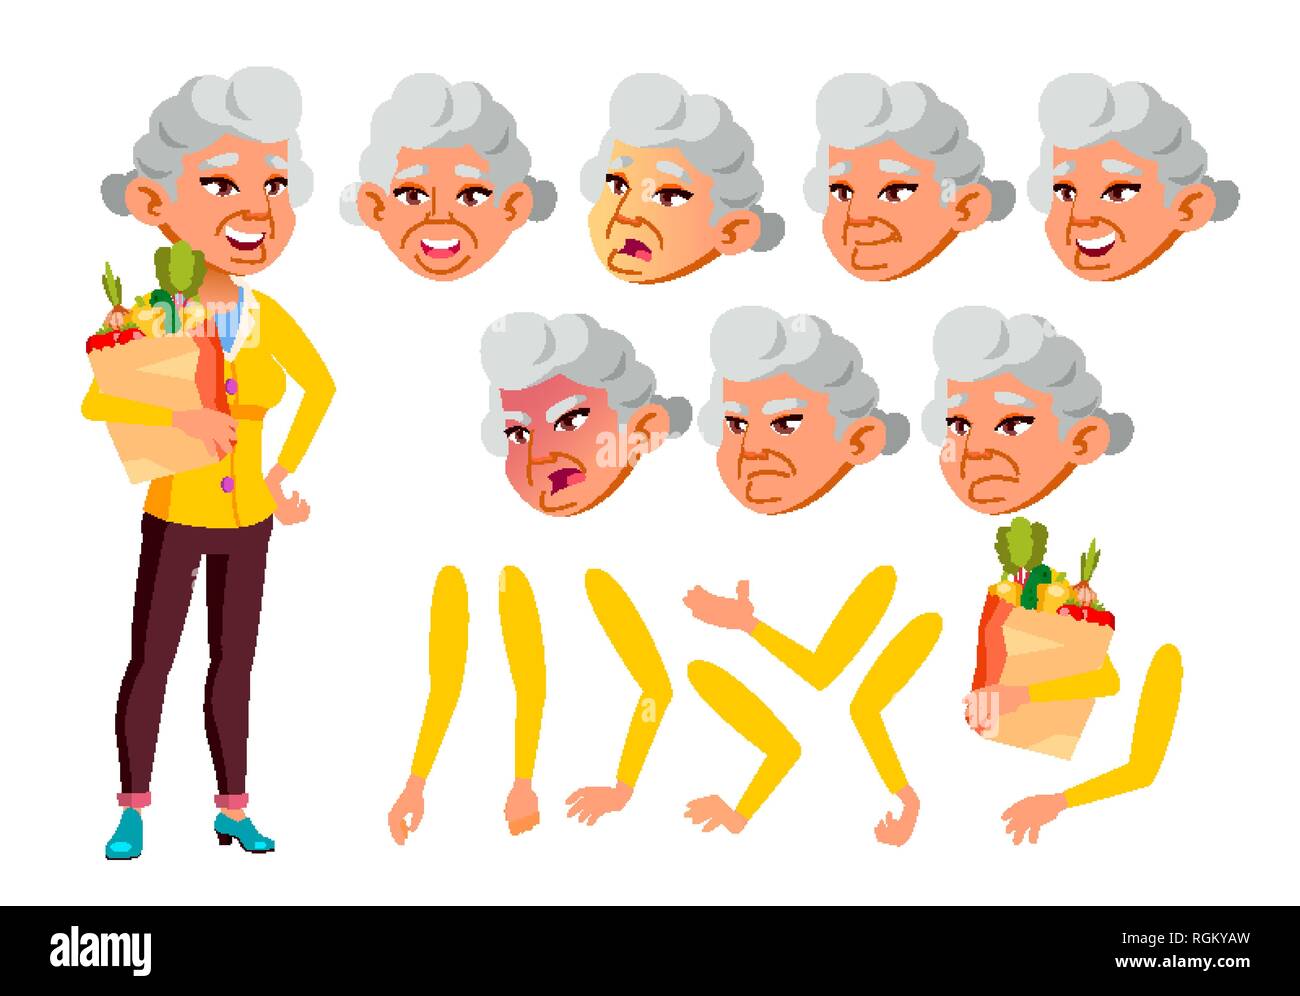 Asian Old Woman Vector. Senior Person. Aged, Elderly People. Activity, Beautiful. Face Emotions, Various Gestures. Animation Creation Set. Isolated Stock Vector